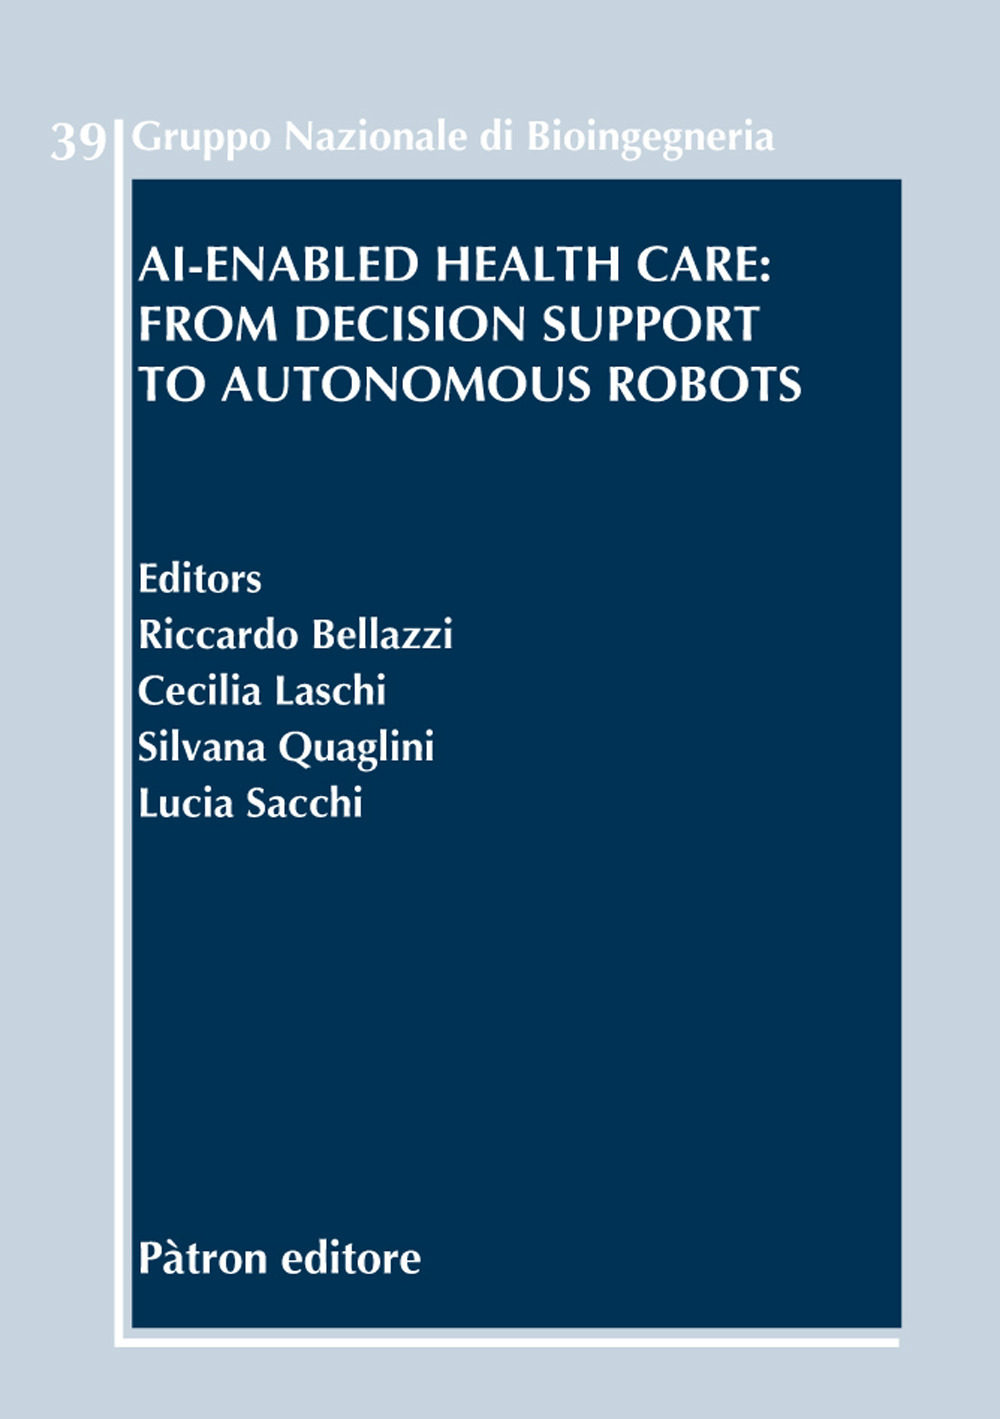 Image of AI-enabled health care: from decision support to autonomous robots